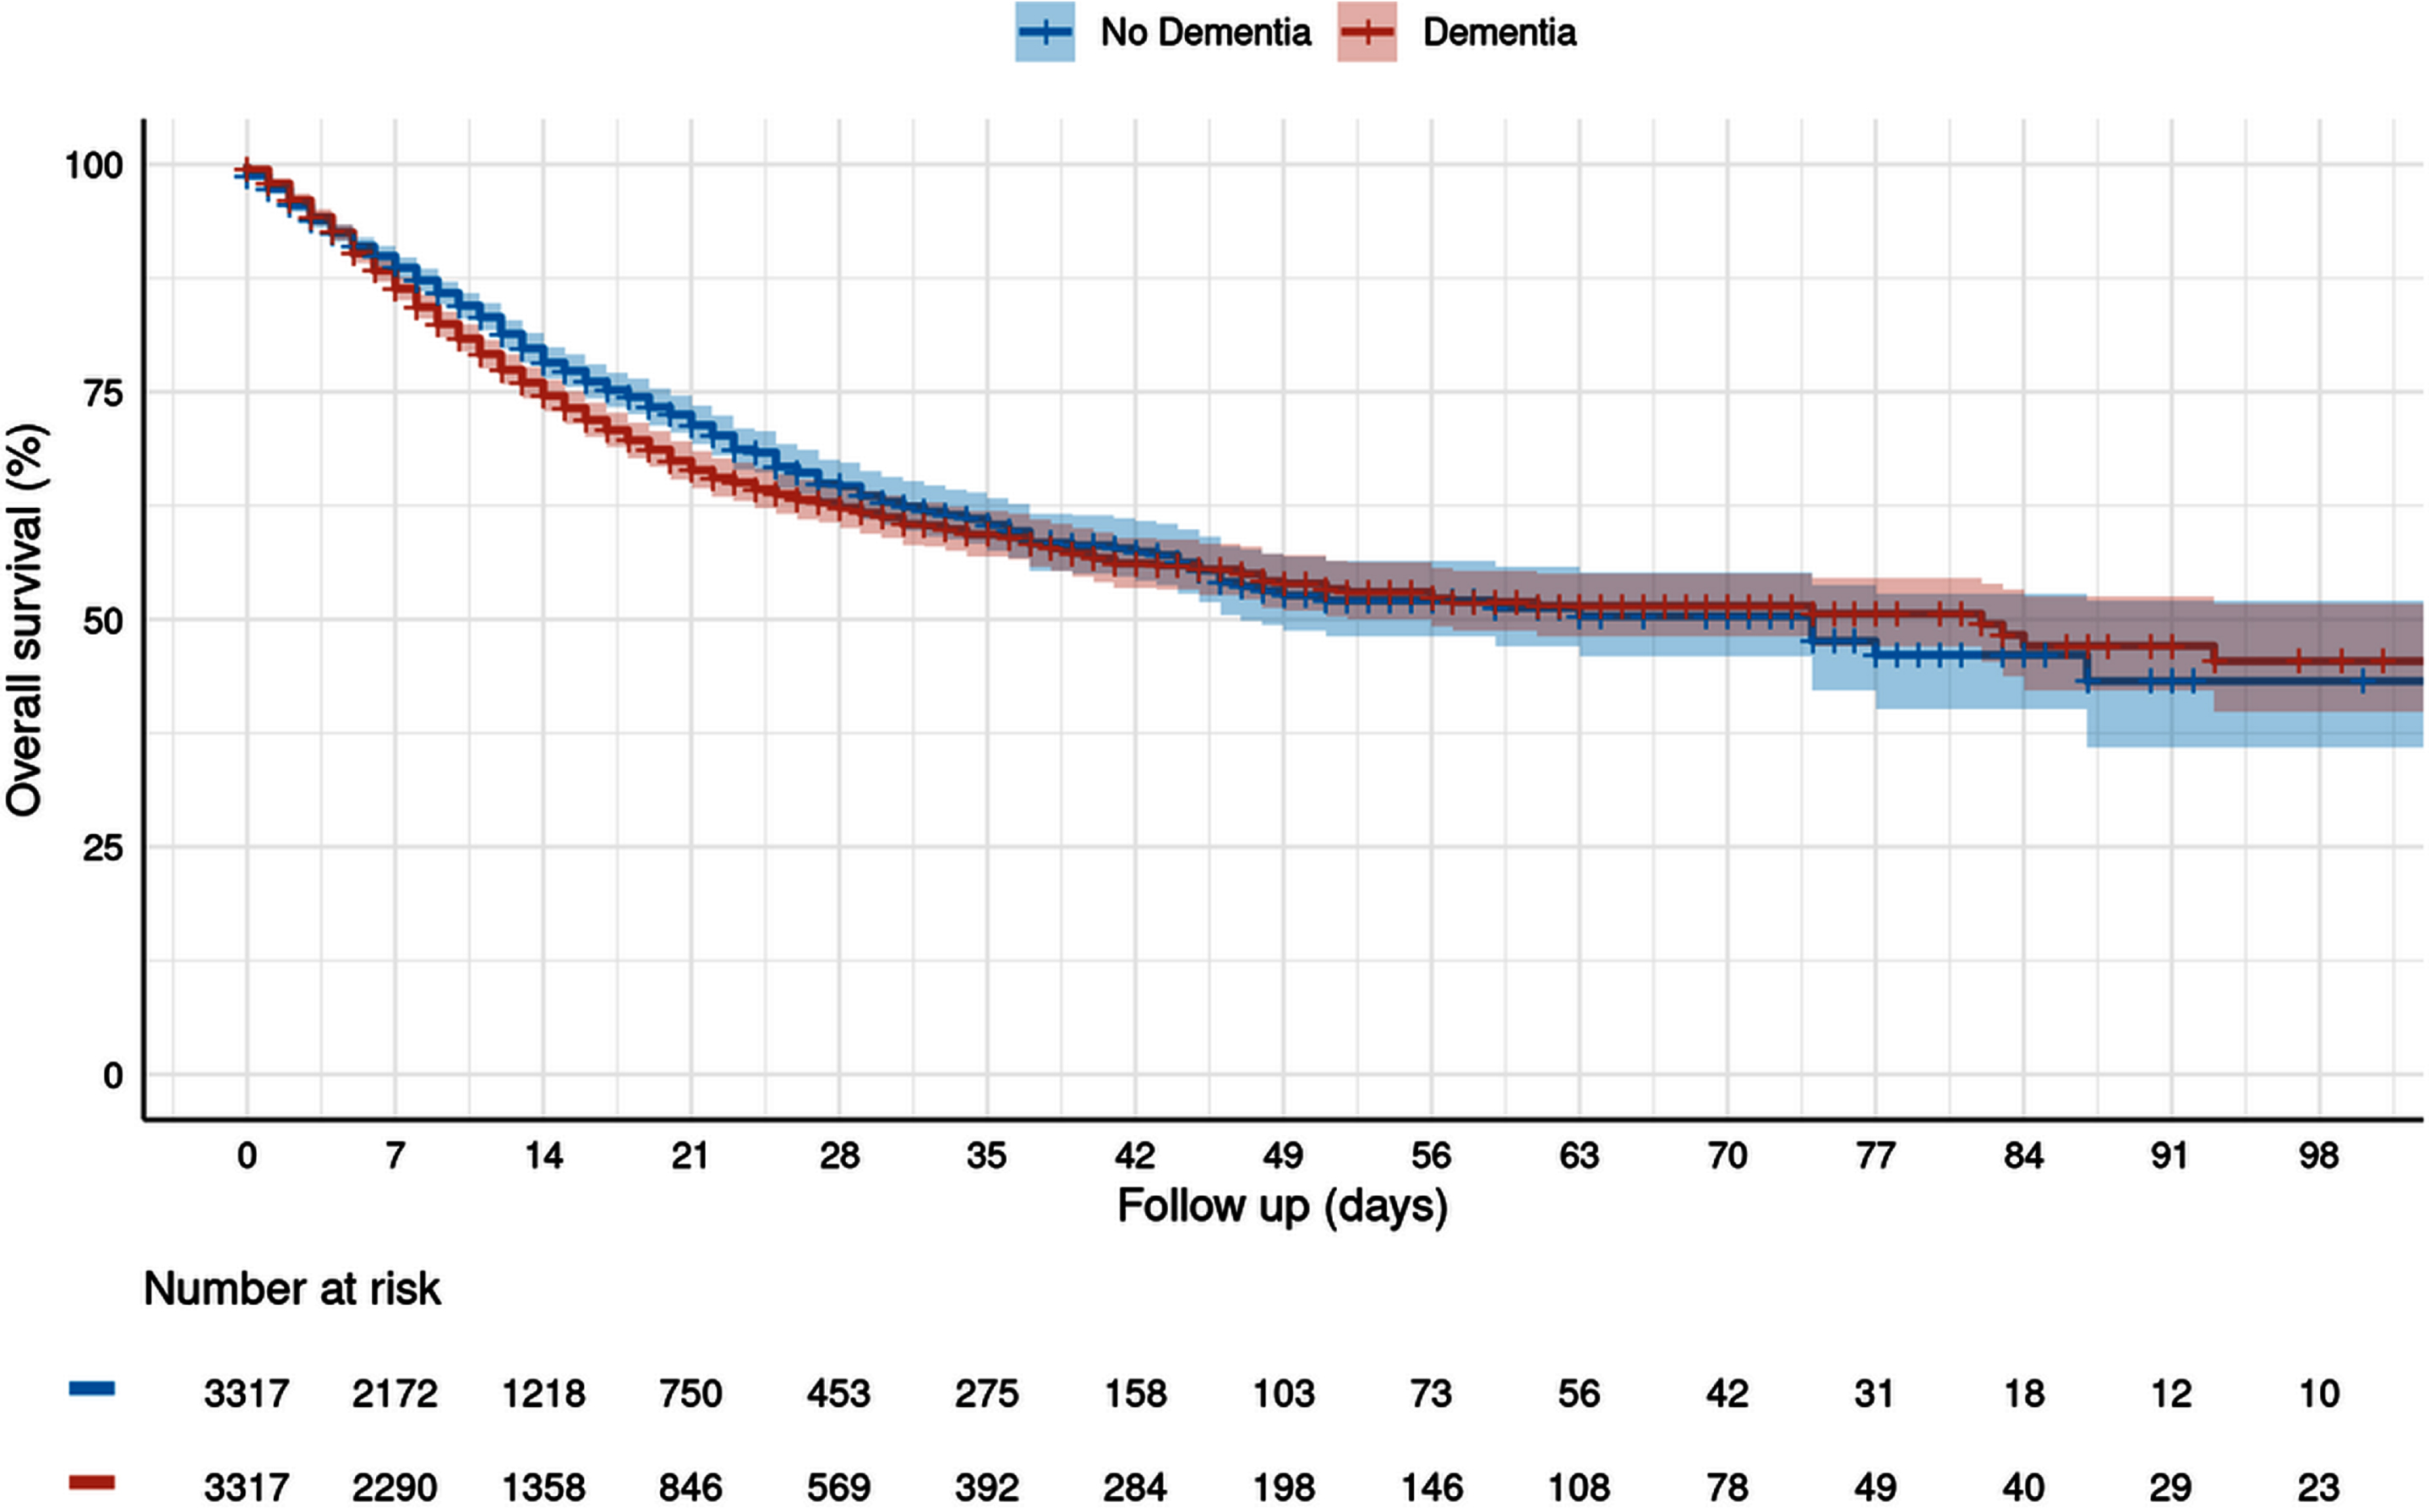 Cumulative mortality during the hospital stay depending on dementia diagnosis (Kaplan-Meier curves).